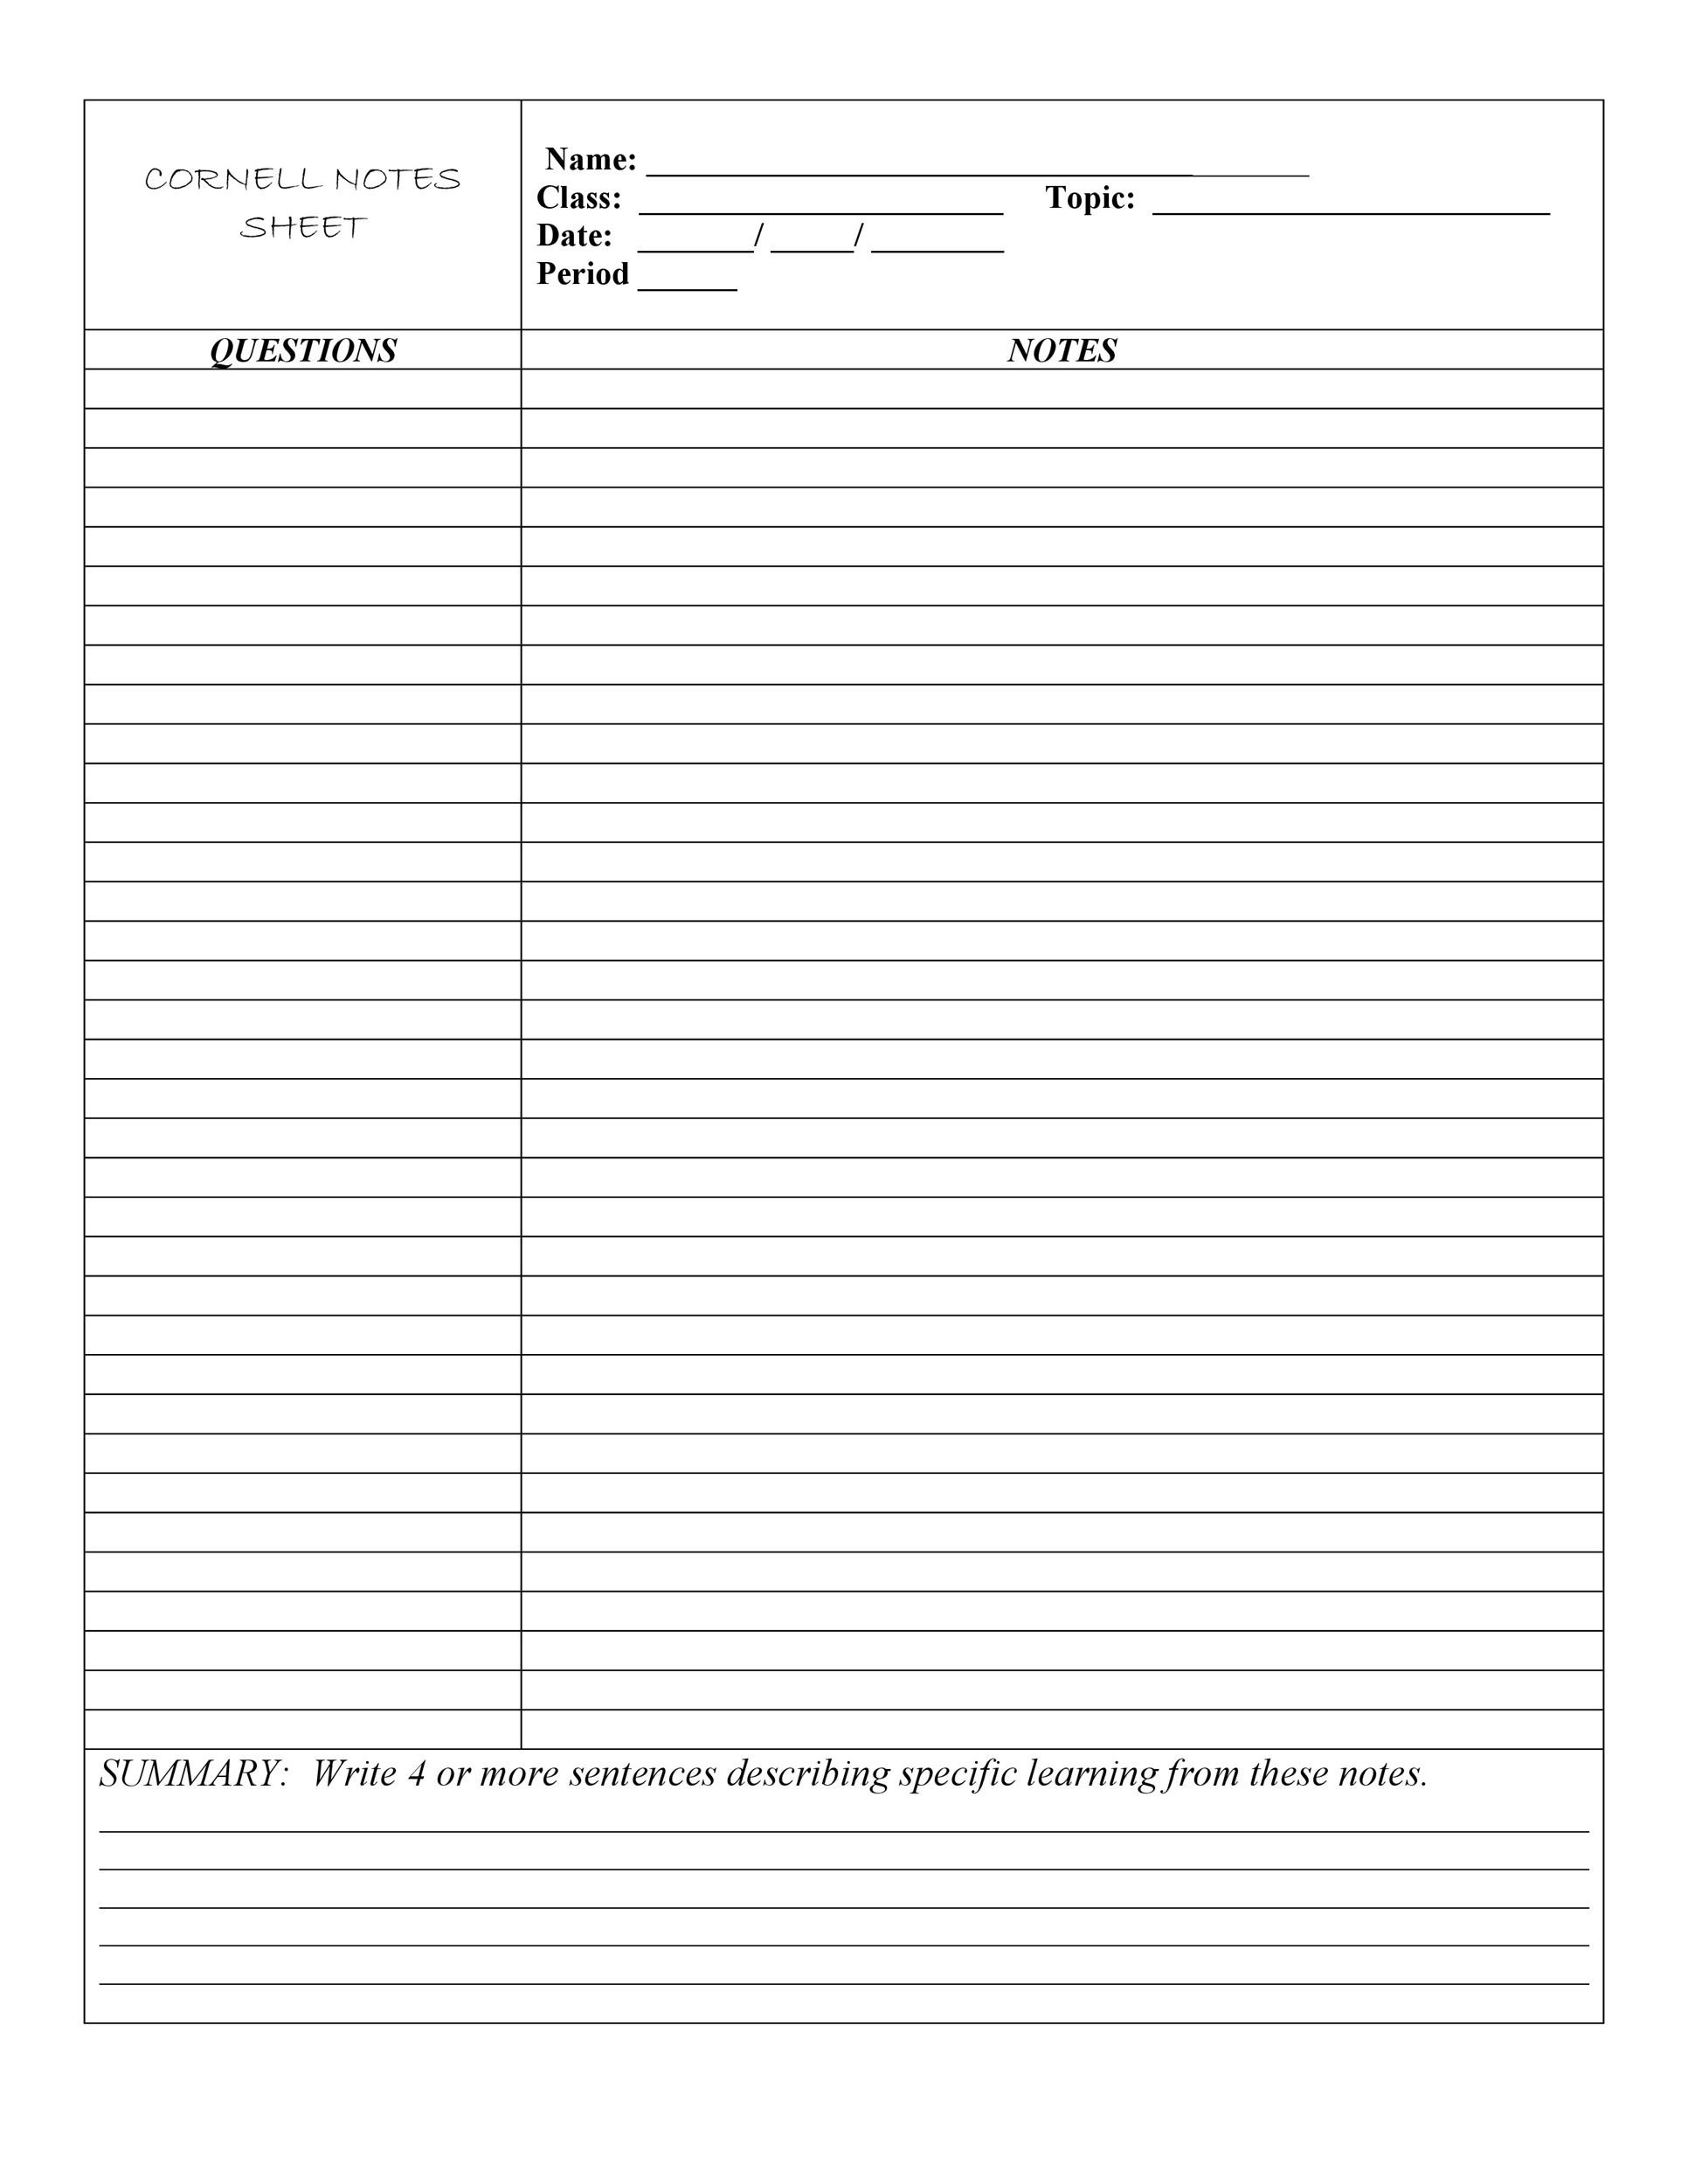 37 Cornell Notes Templates Examples Word Excel PDF 